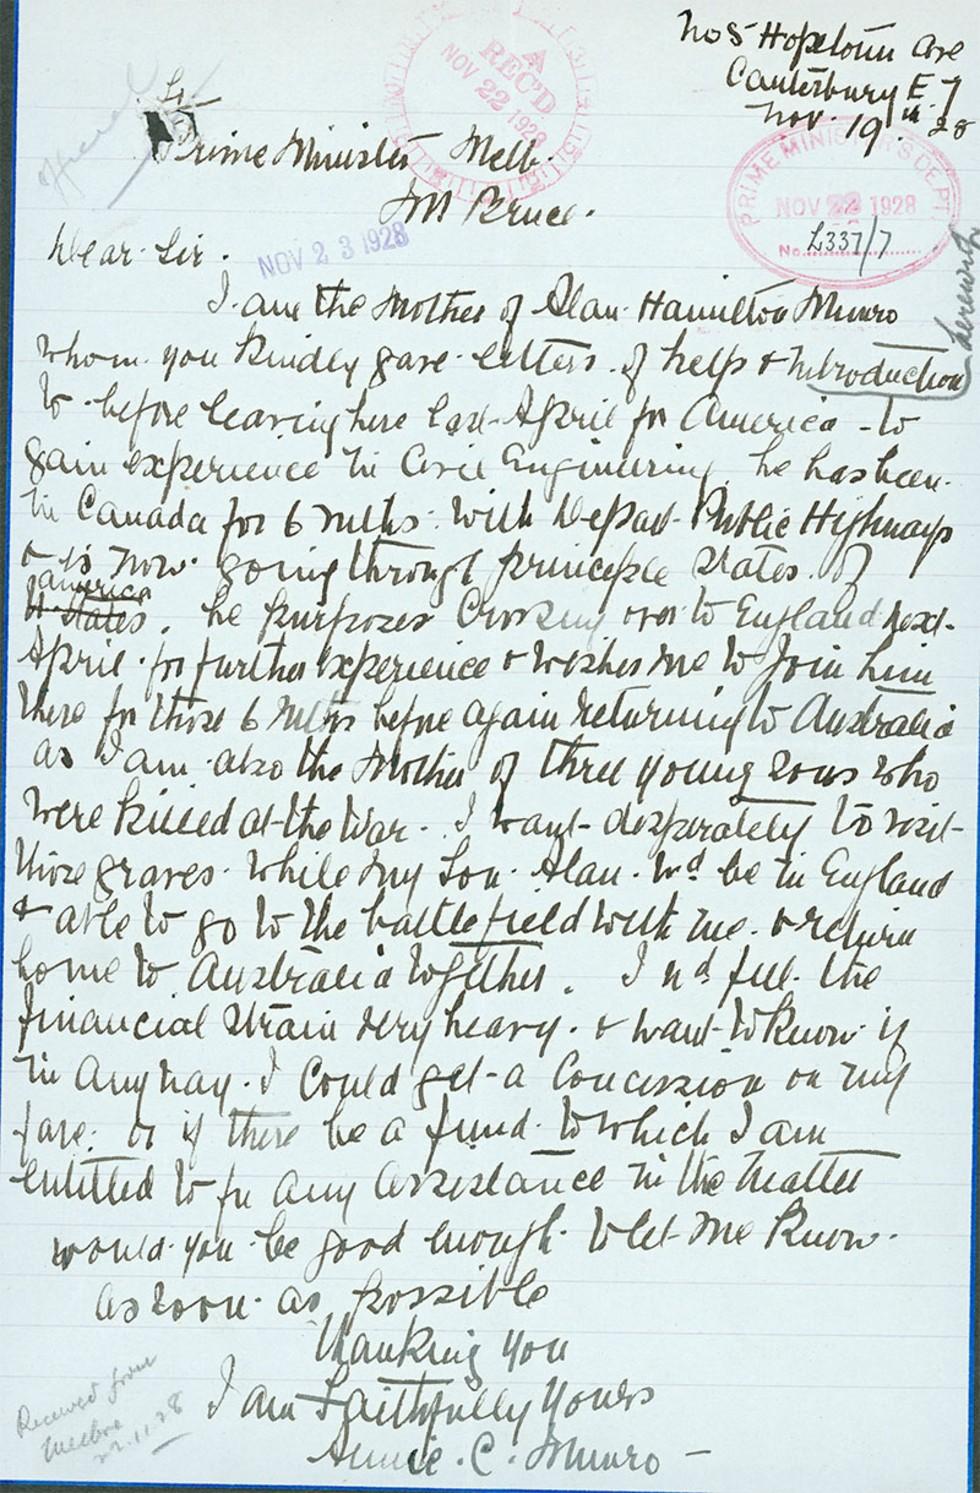 Letter to the Prime Minister from Annie Munro regarding the graves of her soldier sons.